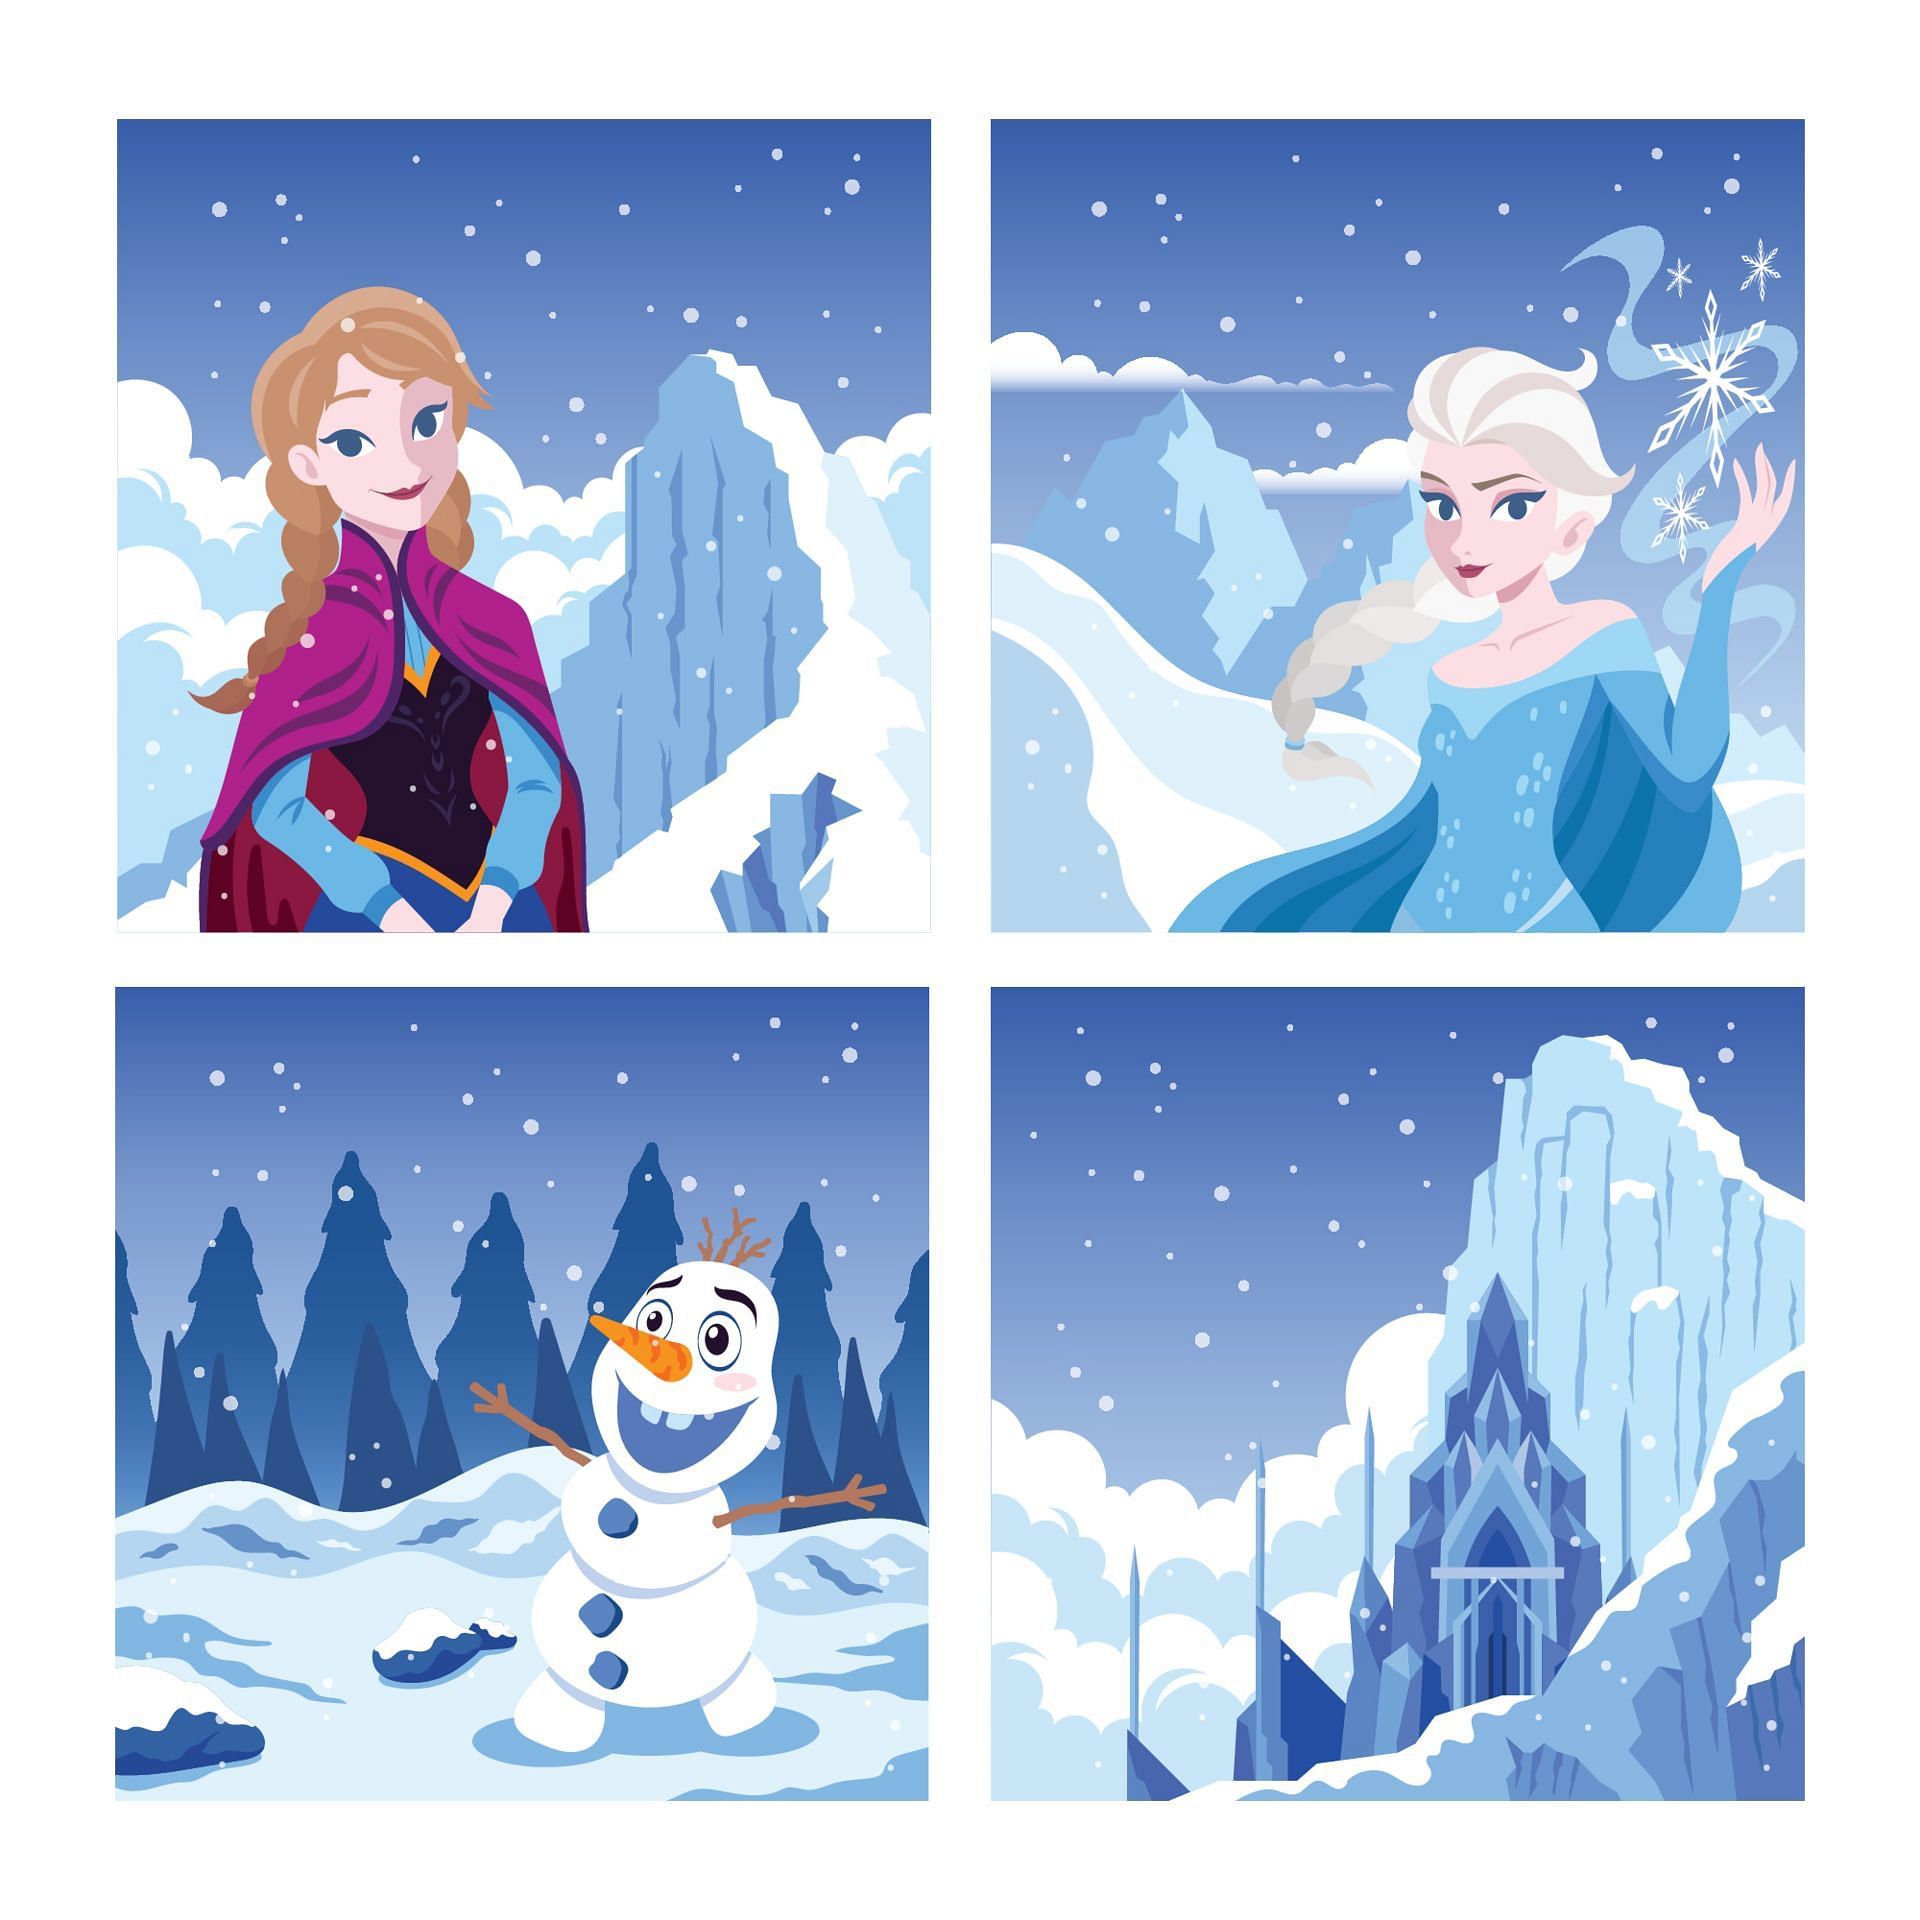 Anna (left) and Elsa (right) appear on the disney princess mental disorder list. (Image via Vecteezy/ Rizky Raudhul)